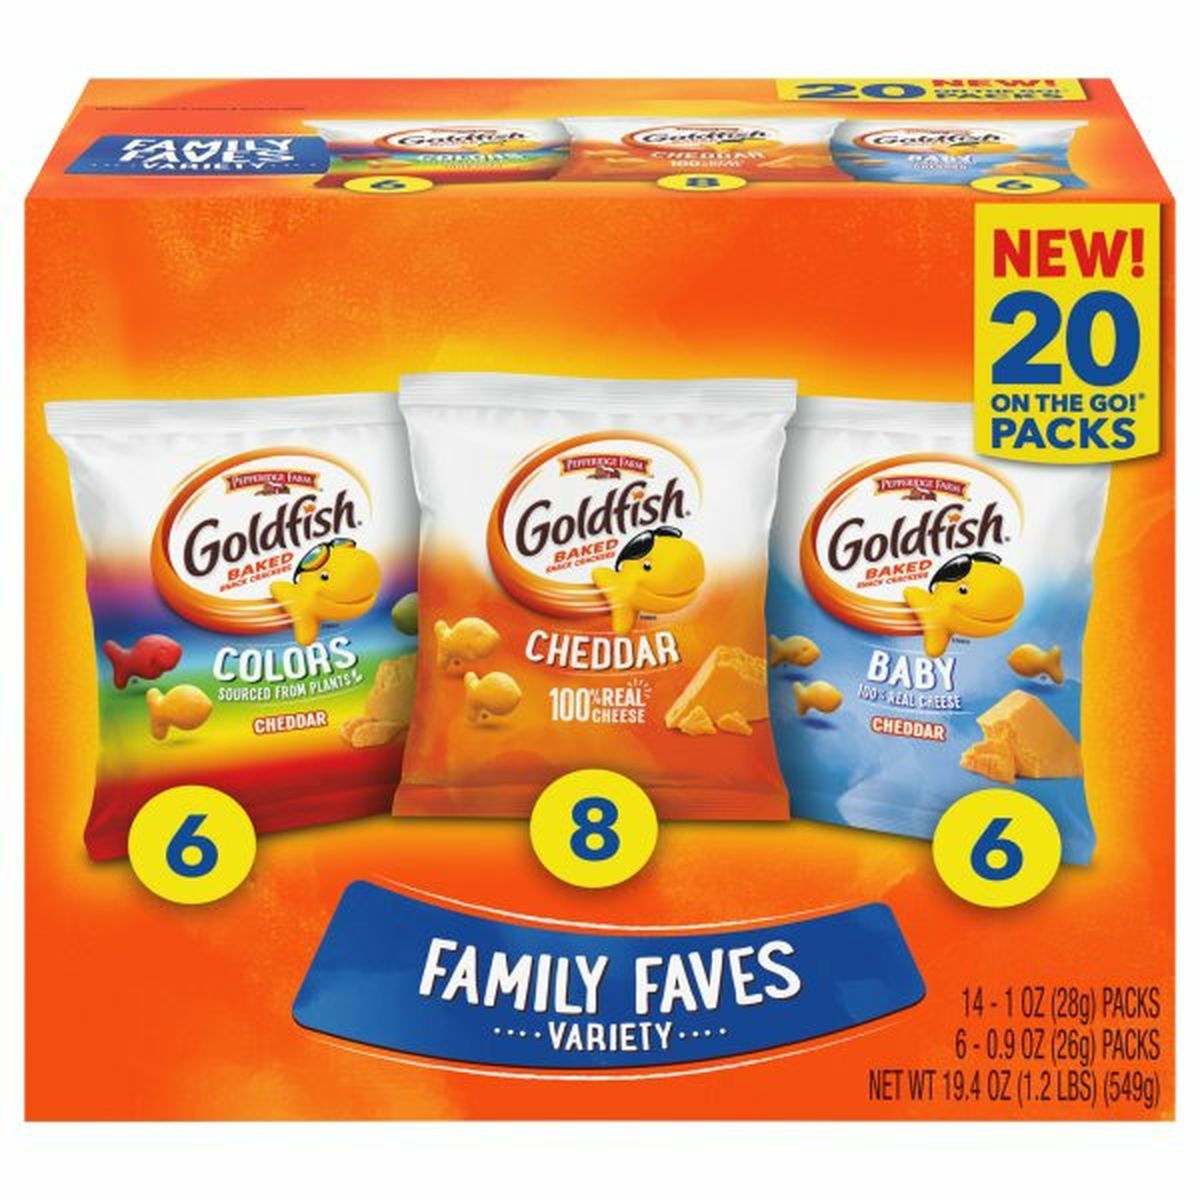 Calories in Pepperidge Farms  Goldfishs Baked Snack Crackers, Family Faves Variety, 20 On the Go Packs